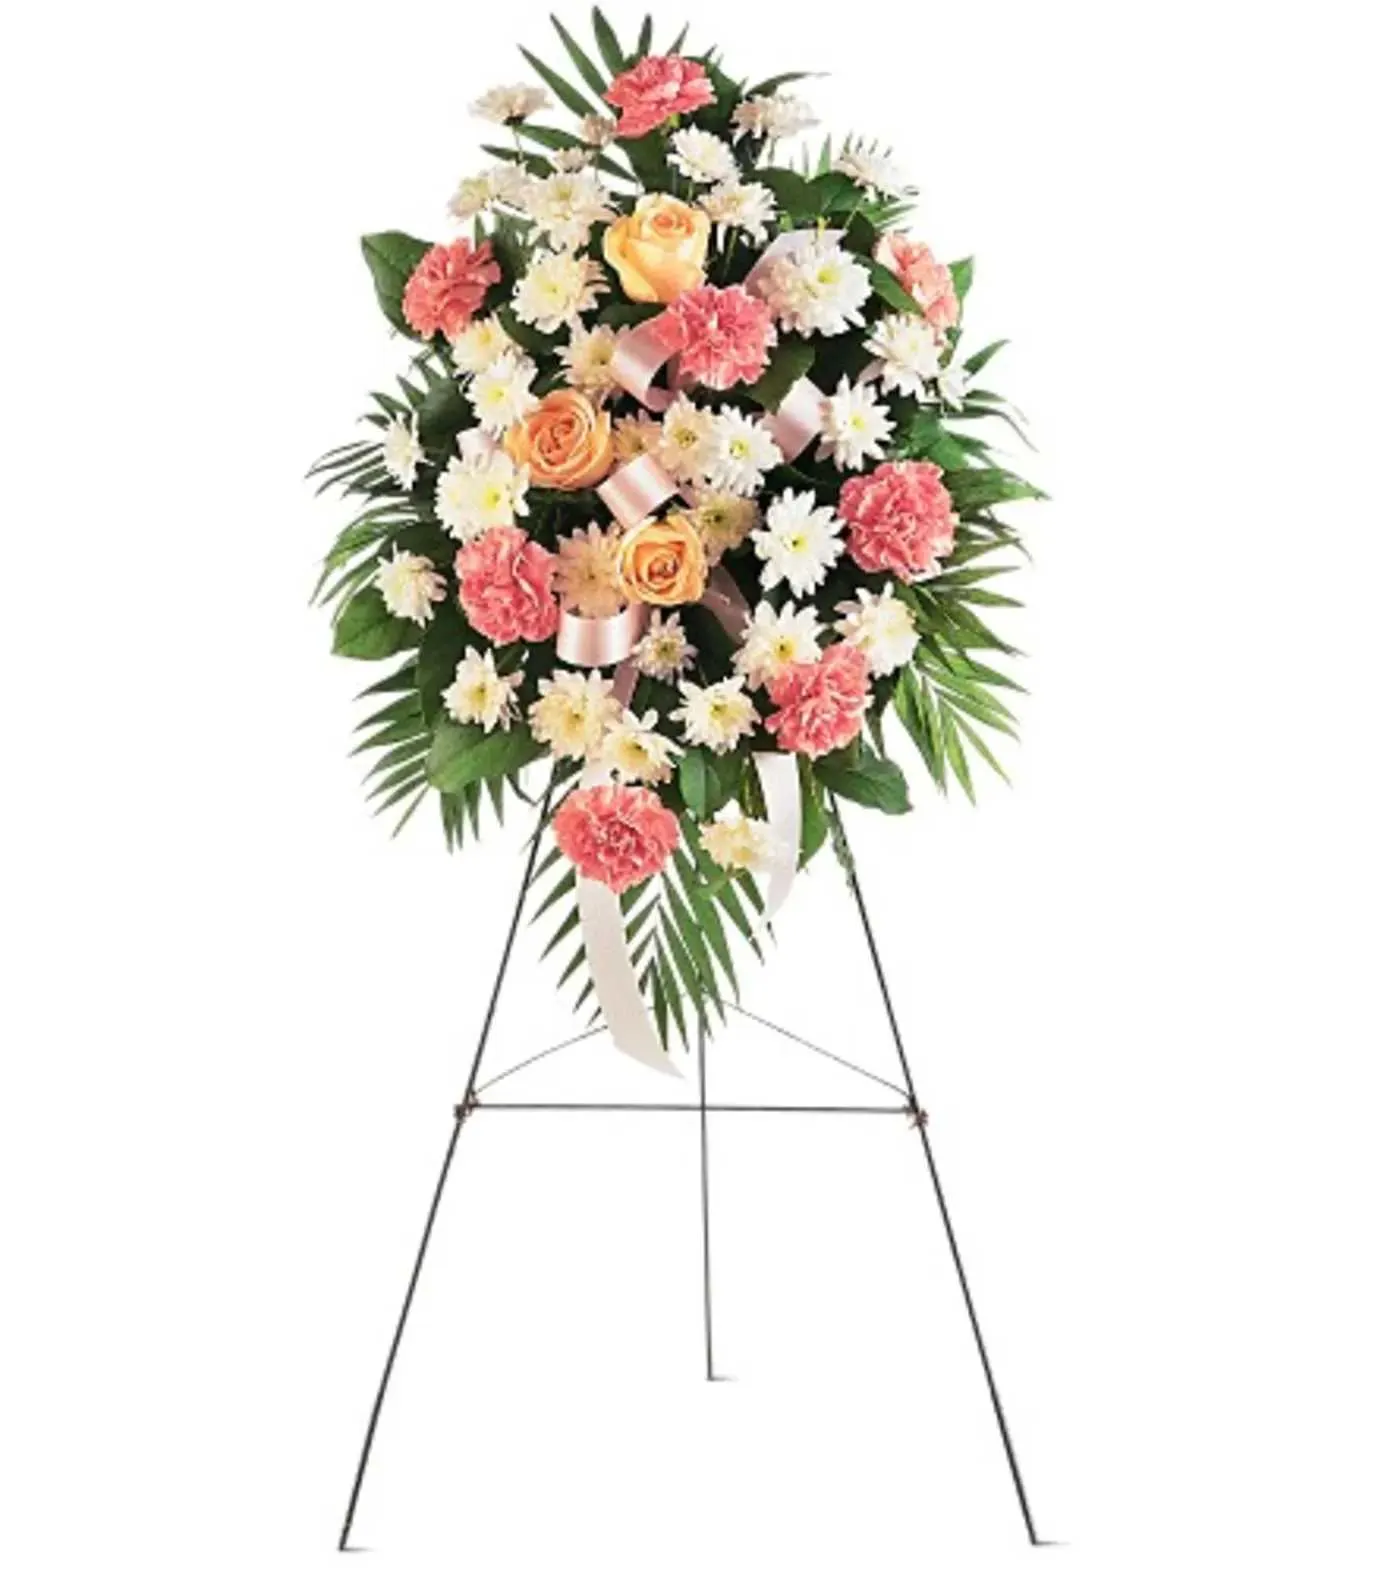 Gentle Thoughts Spray - The pink and white flowers of this lovely spray will express your deepest sympathy ever so gently to all in attendance. One spray of pink carnations white spray chrysanthemums and rose accents with a pink ribbon 